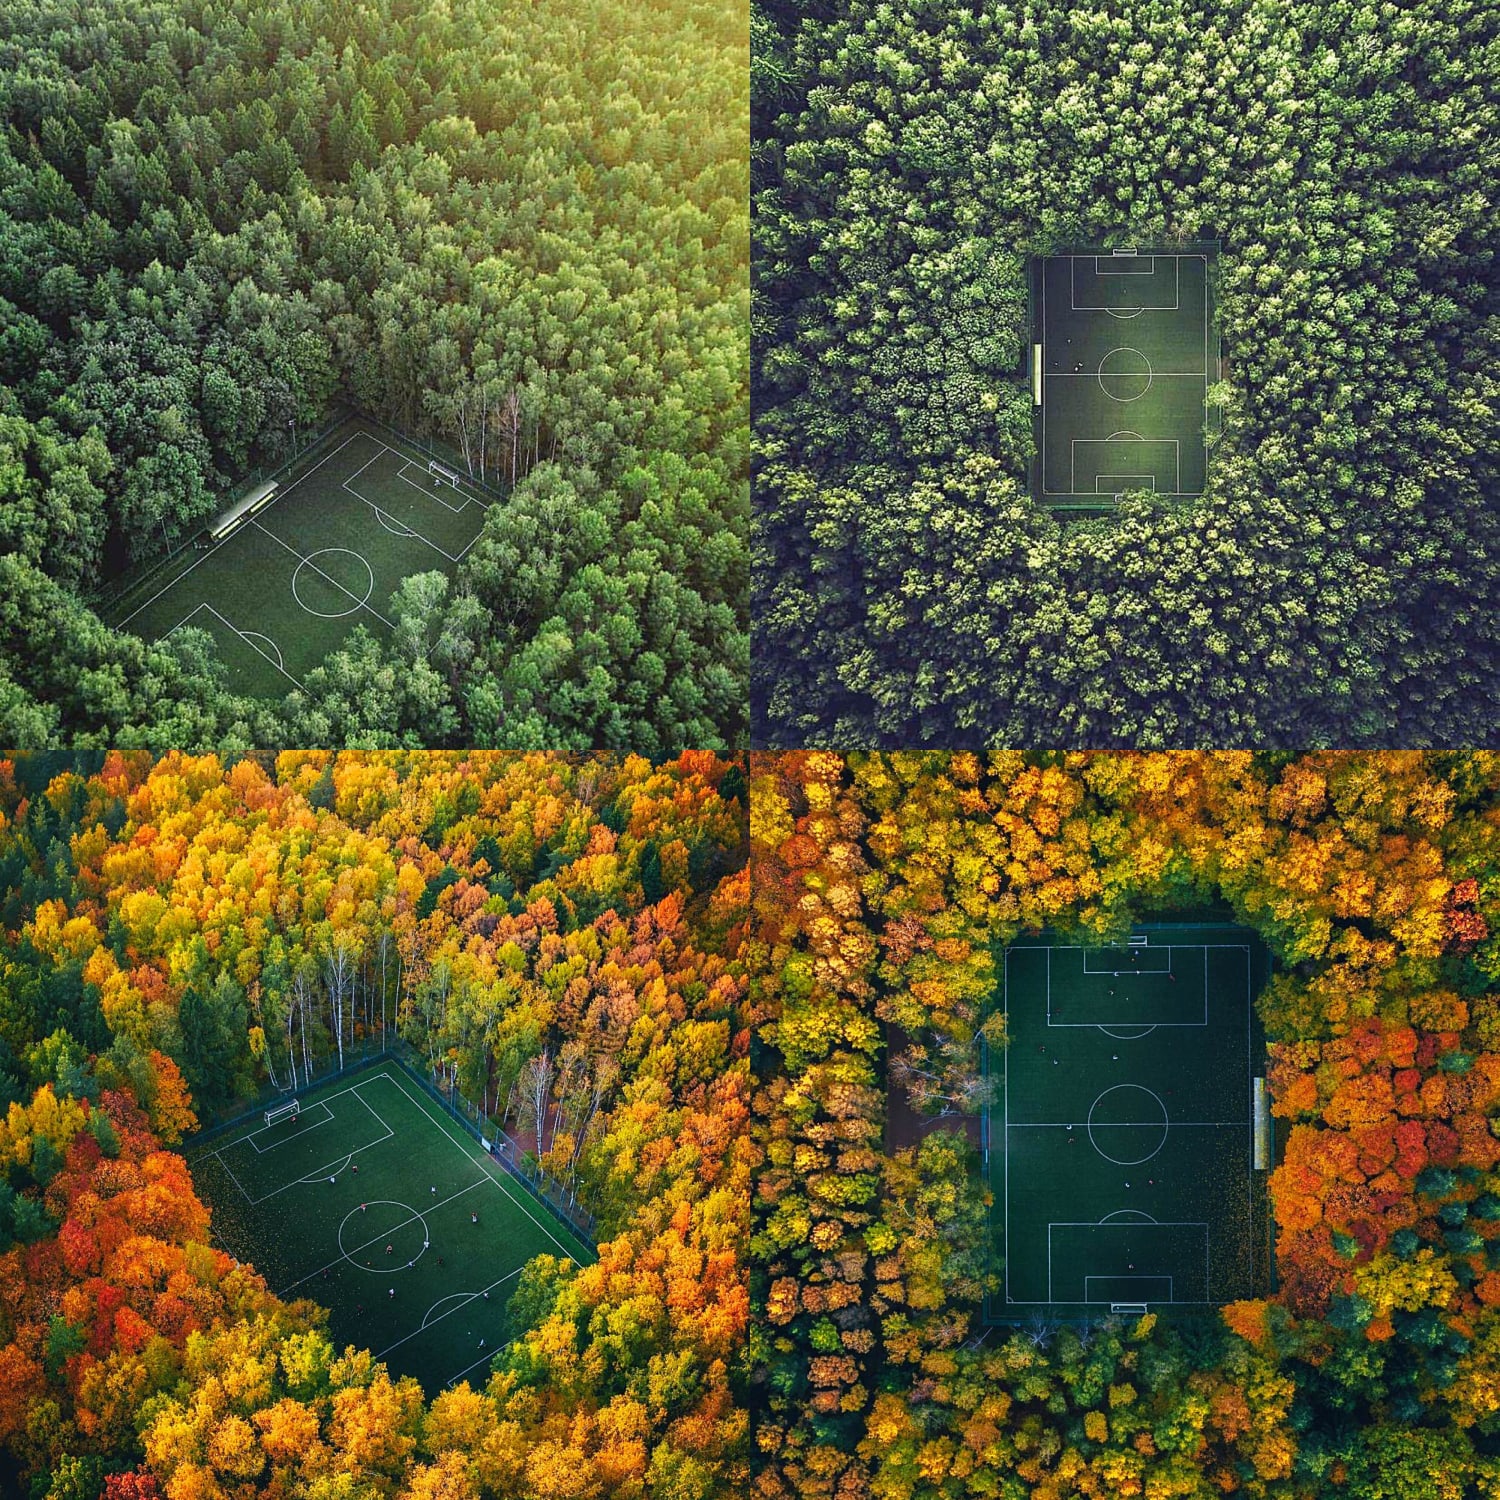 Forest Soccer Field in Moscow, Russia (summer vs autumn)